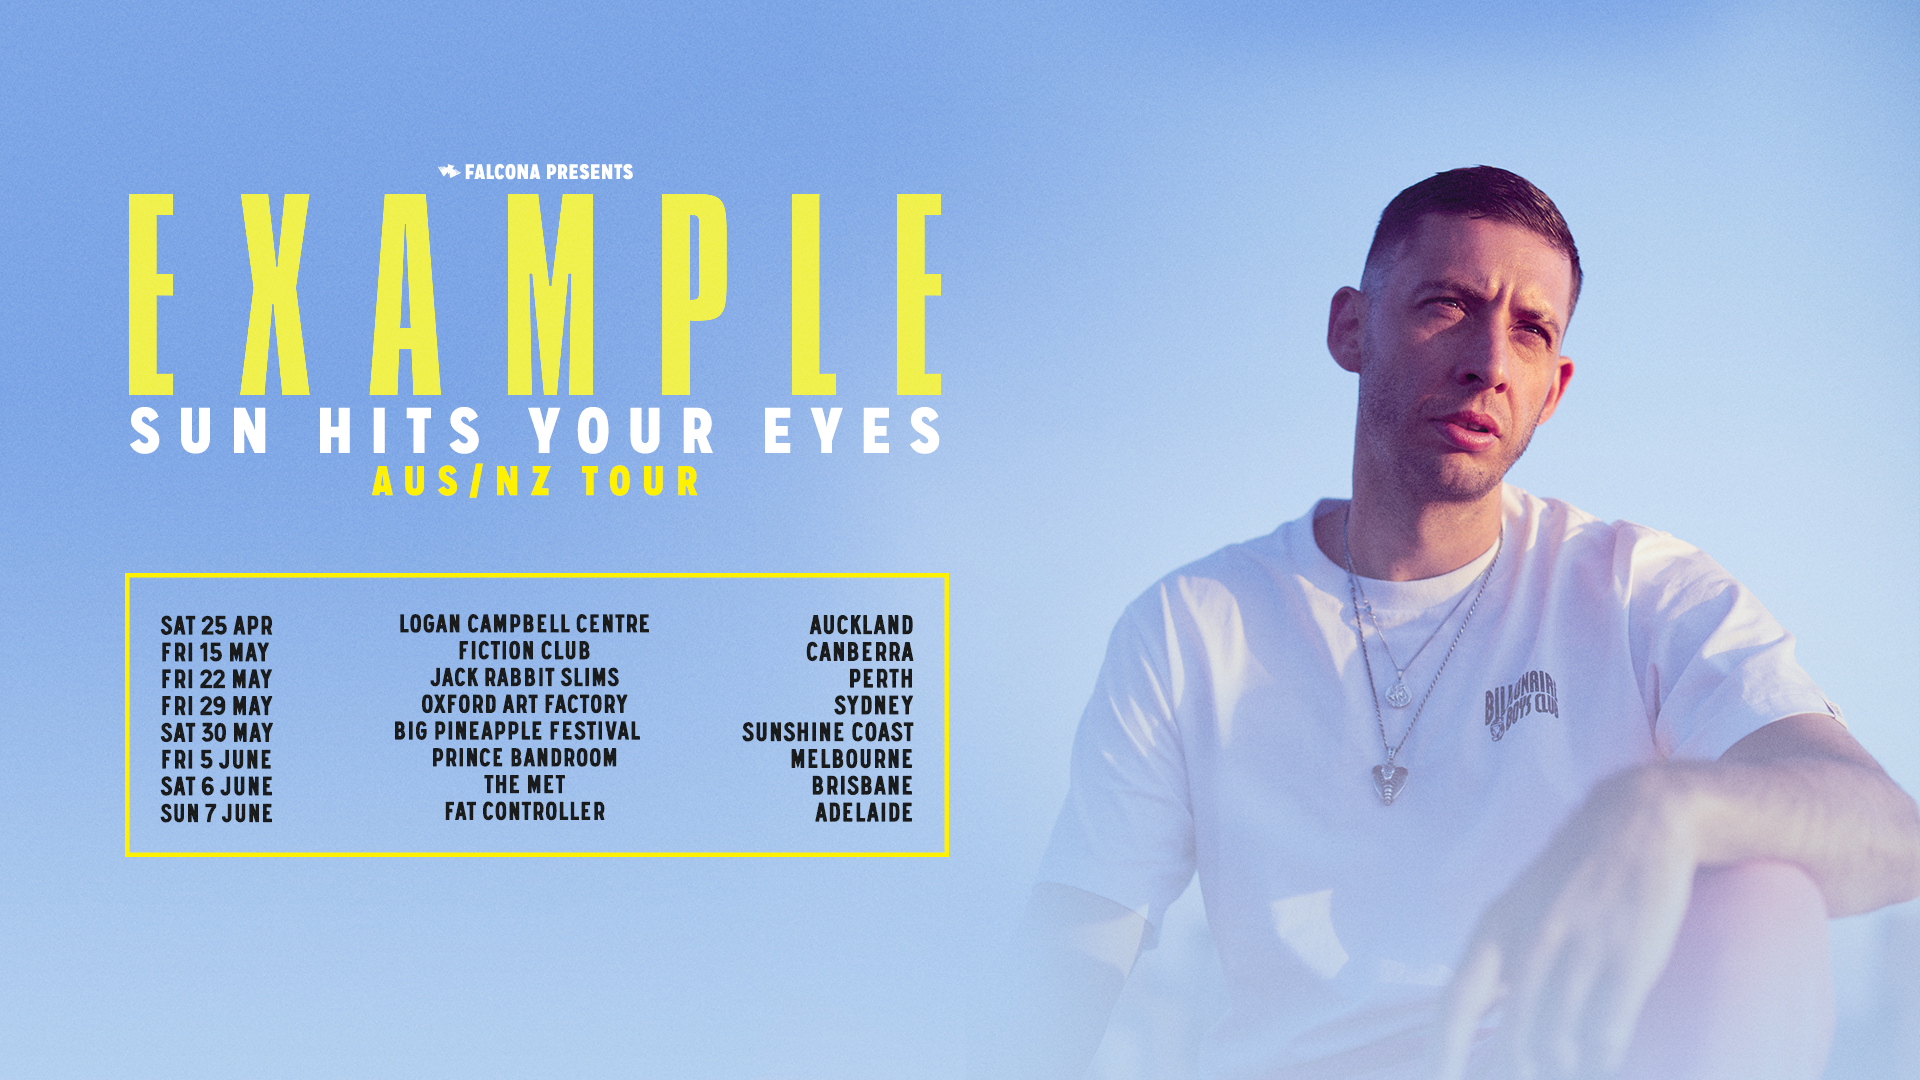 EXAMPLE - 'Sun Hits Your Eyes' Tour